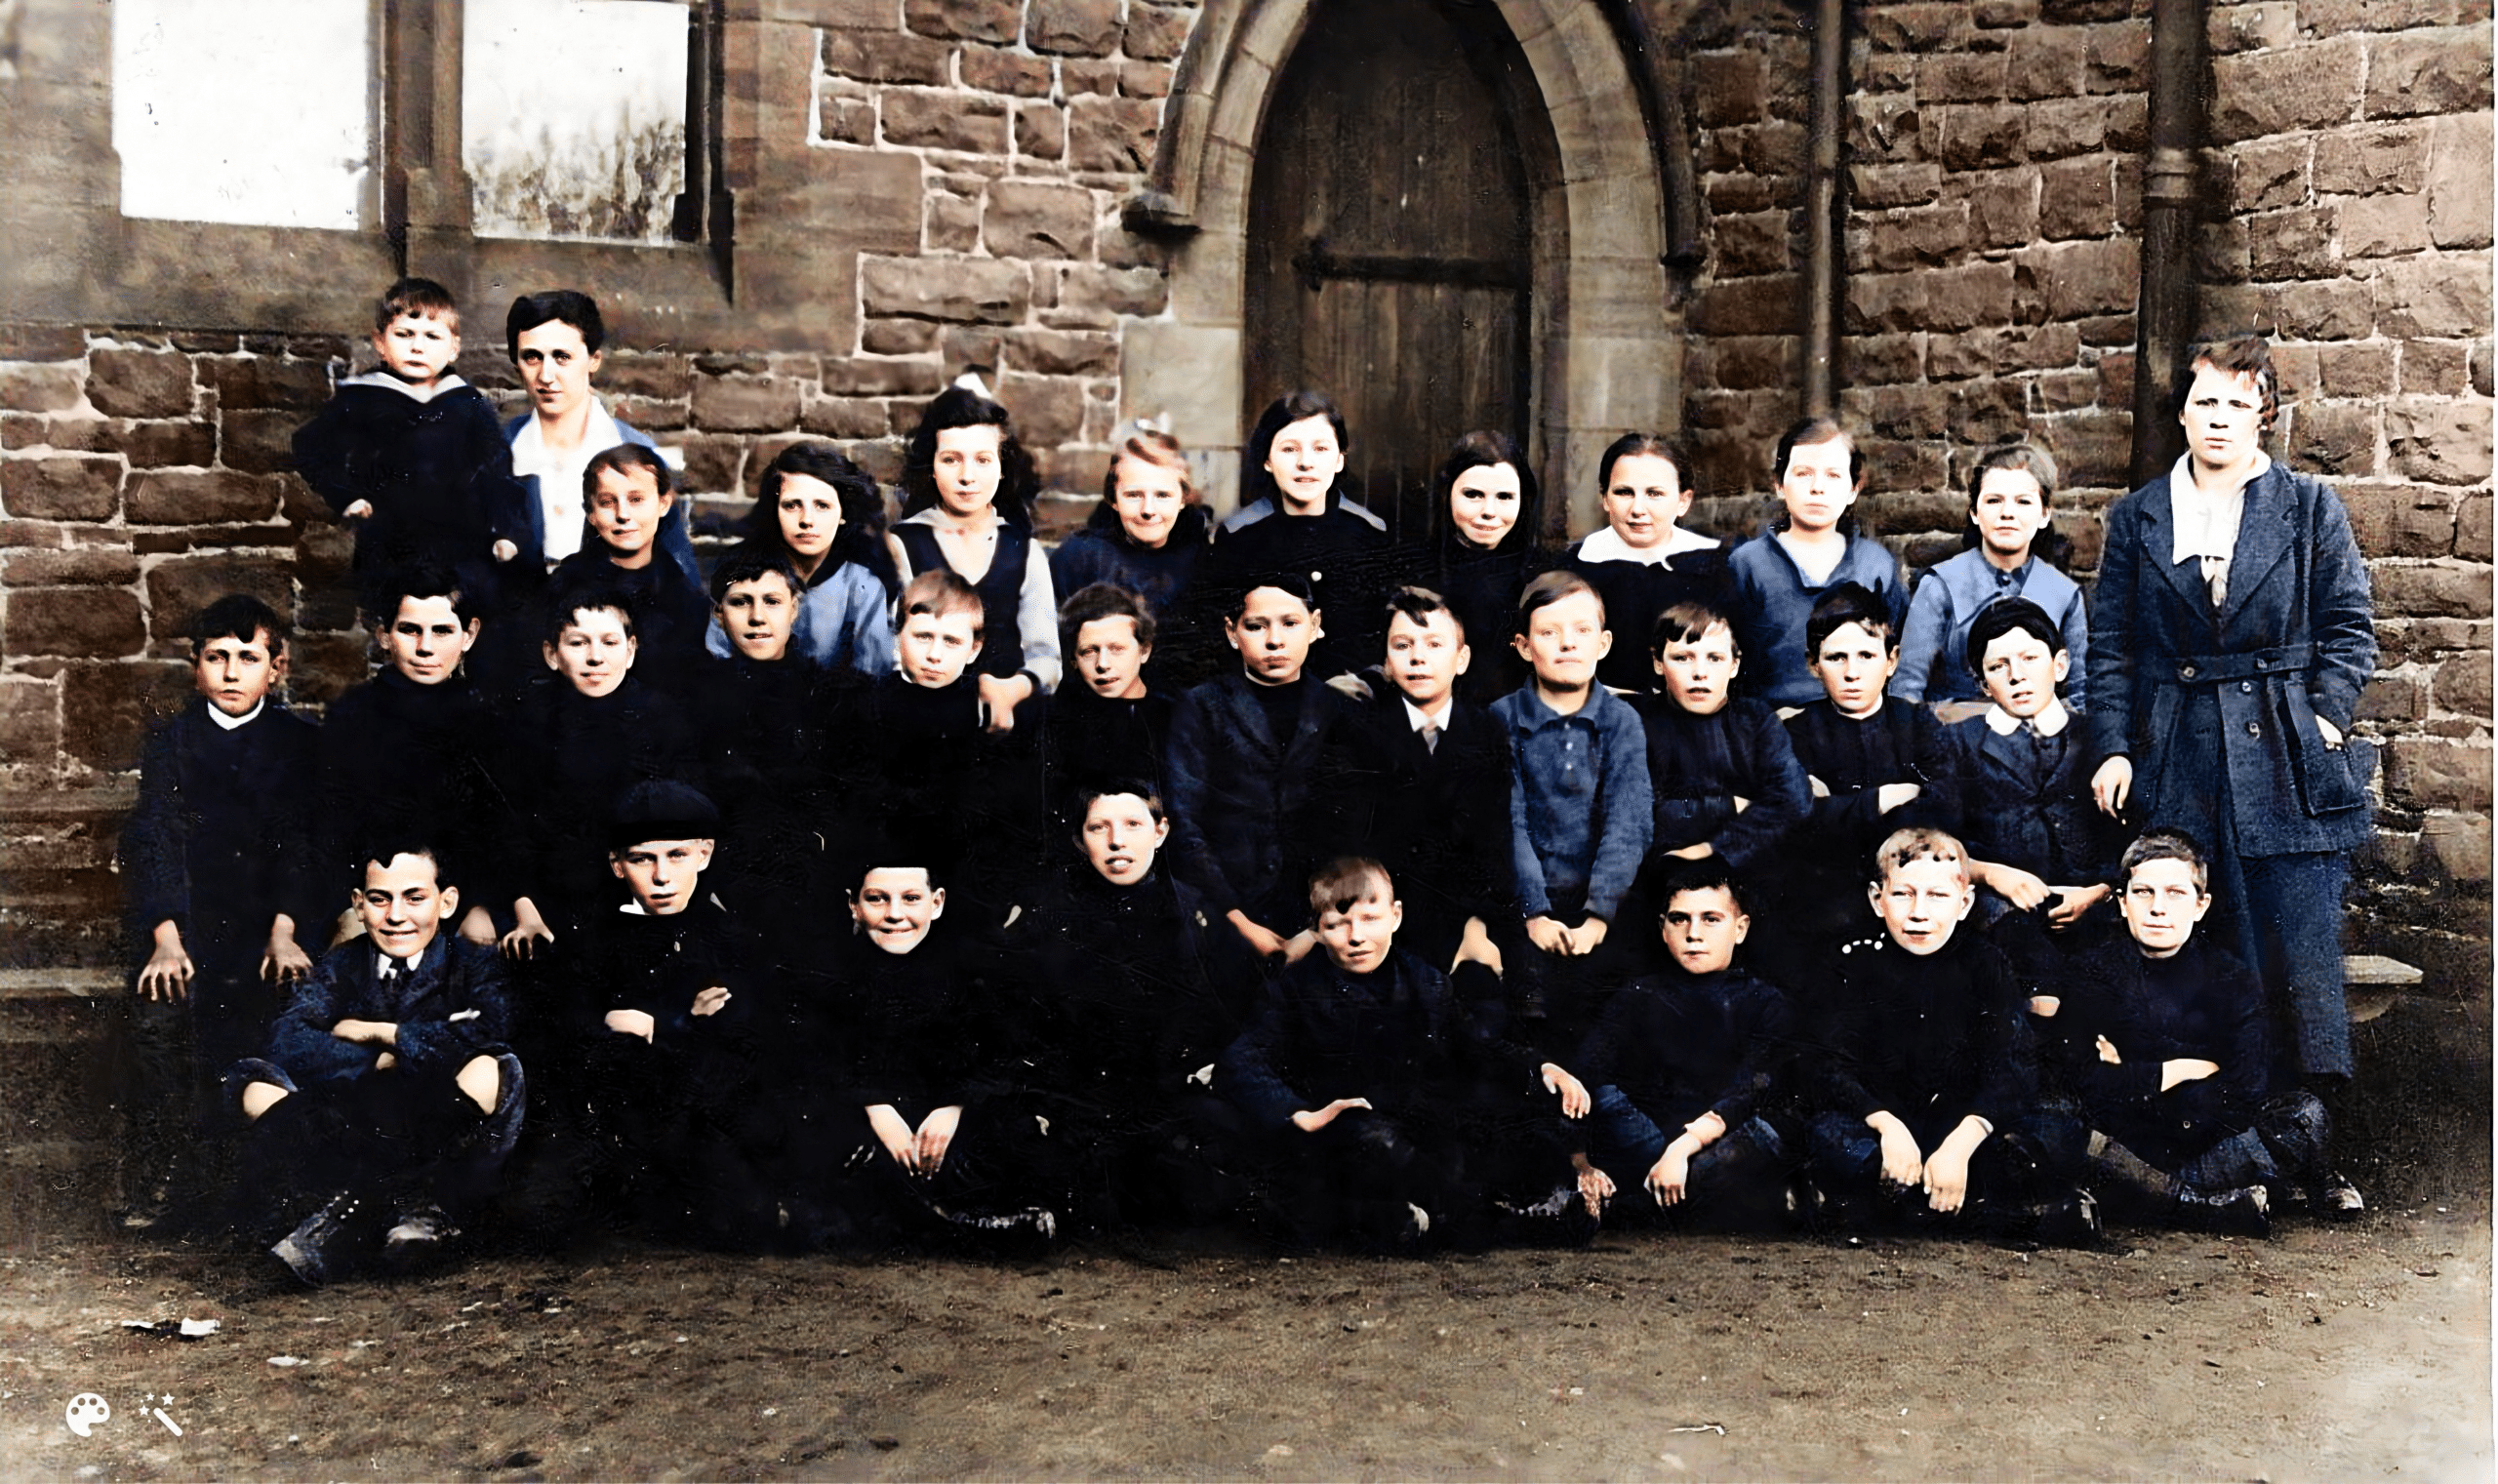 Mary Dawson (nee Curren, standing, left) at Church of England School in Newbiggin-by-the-Sea. Photo colorized and enhanced by MyHeritage